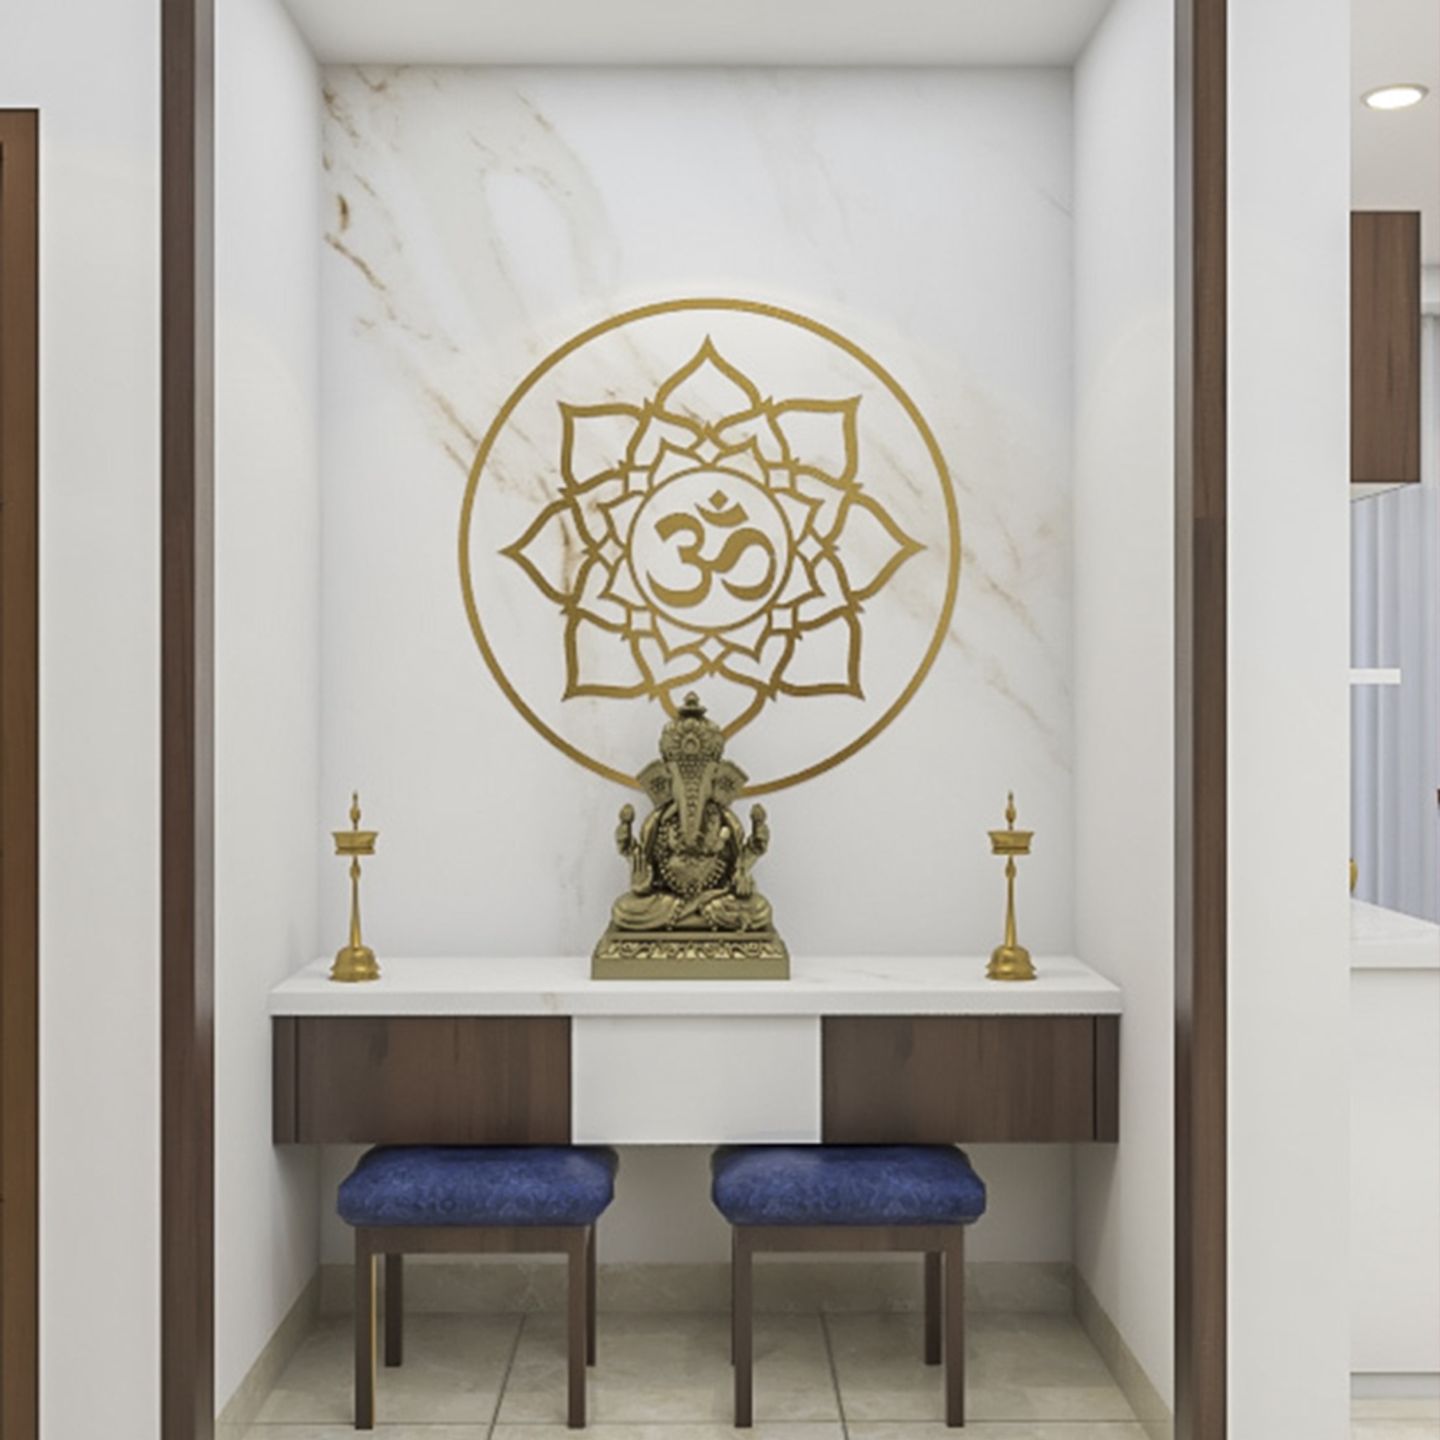 Pooja Room With White And Wood Wall-Mounted Unit, Two Blue Stools, Golden Om Mandala And Marble Wall - Livspace